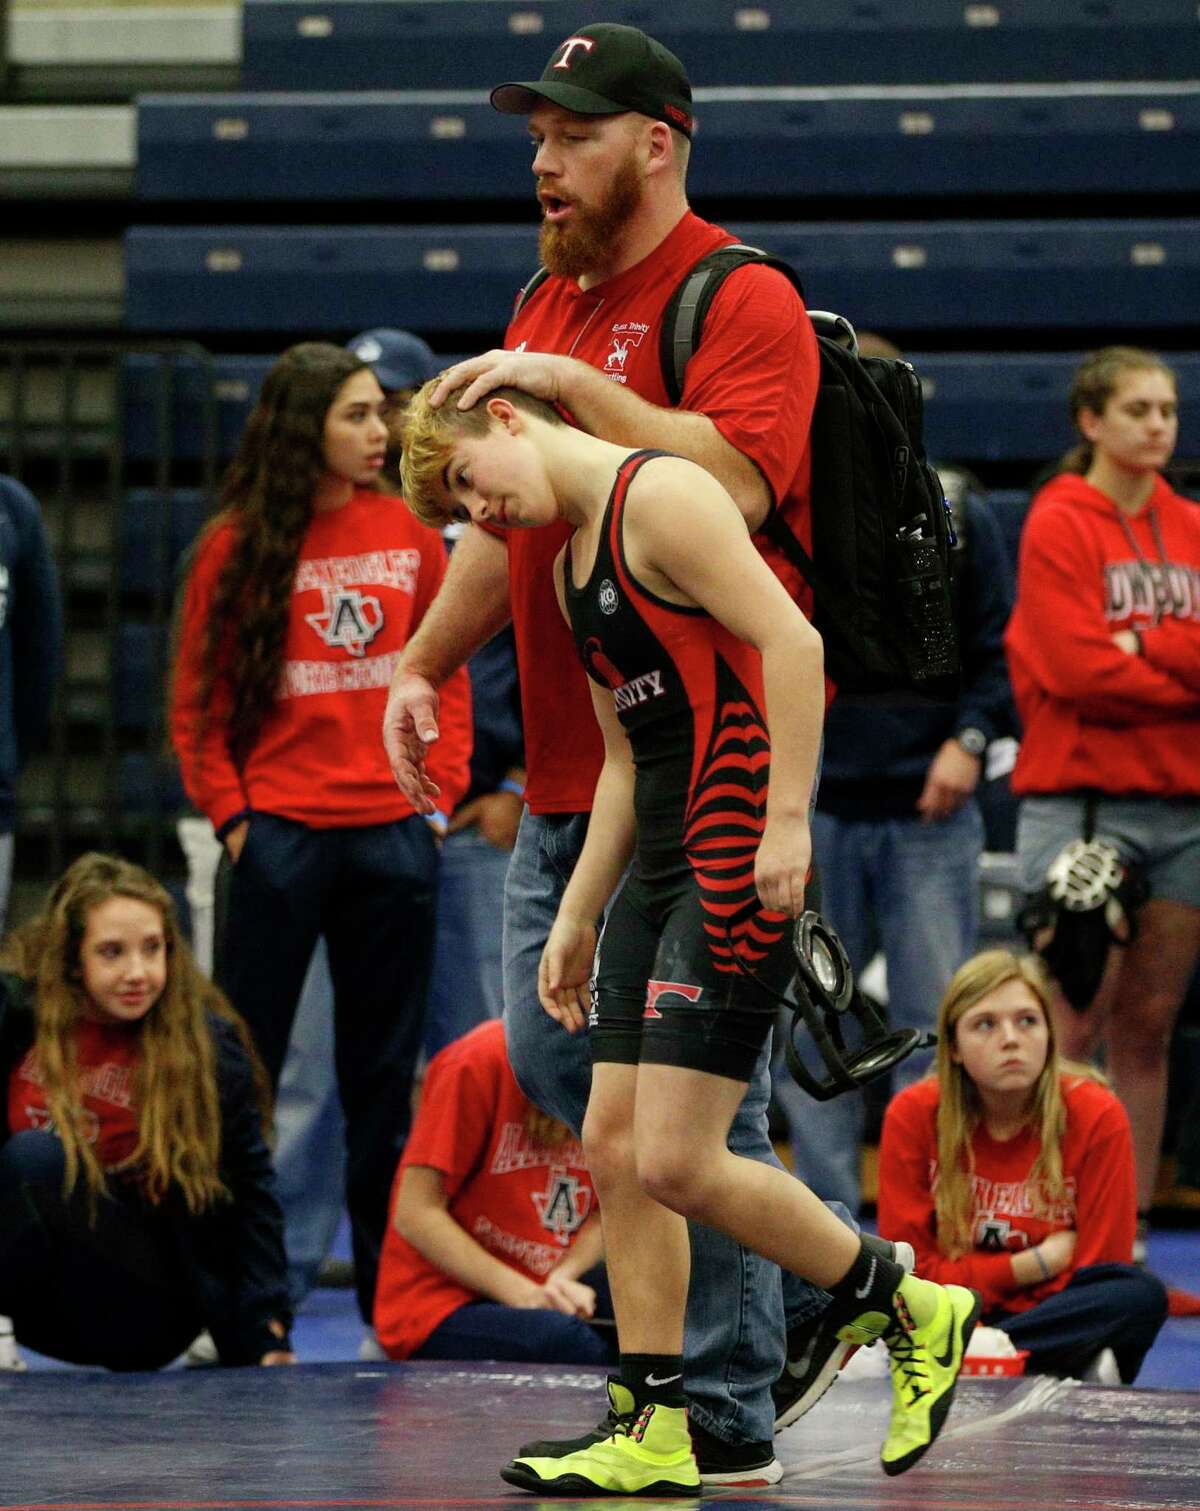 FILE - In this Feb. 18, 2017, file photo, Euless Trinity's Mack Beggs is consoled by coach Travis Clark after Beggs' opponent forfeited during the finals of the UIL Region 2-6A wrestling tournament at Allen High School in Allen, Texas. When Texas transgender wrestler Mack Beggs won a girlsÂ?’ state championship, his victory drew jeers and complaints that his steroid therapy treatment had given him an unfair advantage against girls who risked injury just by getting on the mat with him, Now state lawmakers are pushing a bill that could deny Beggs, a Dallas area-junior, a chance to defend his title. (Nathan Hunsinger/The Dallas Morning News via AP, File)